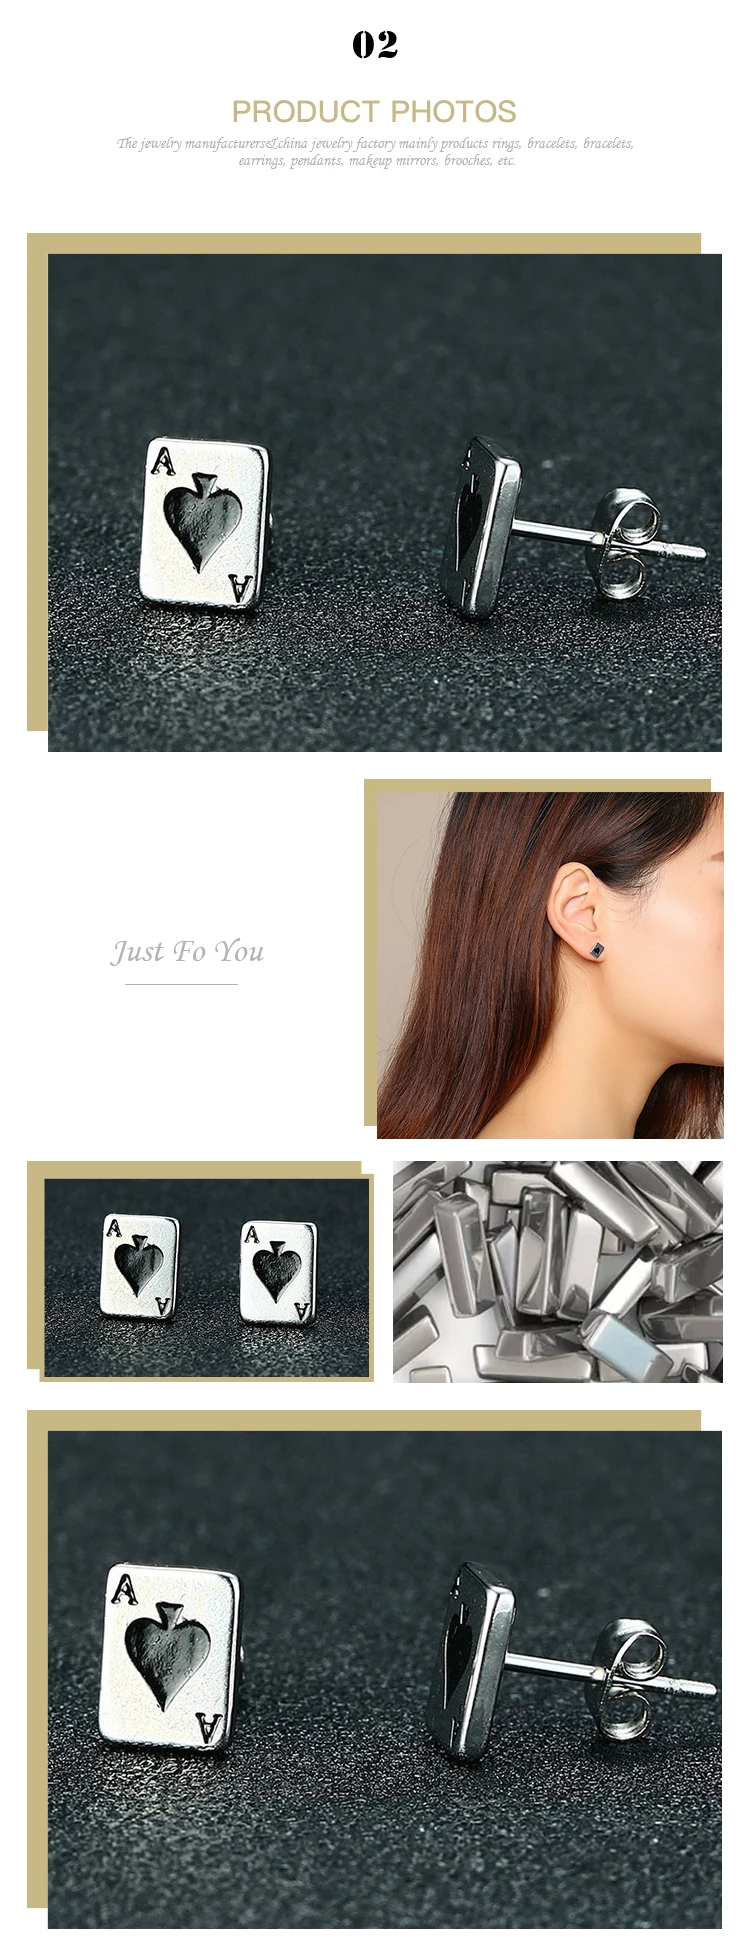 Fashion Stainless steel stud women earring with A of Spades pattern